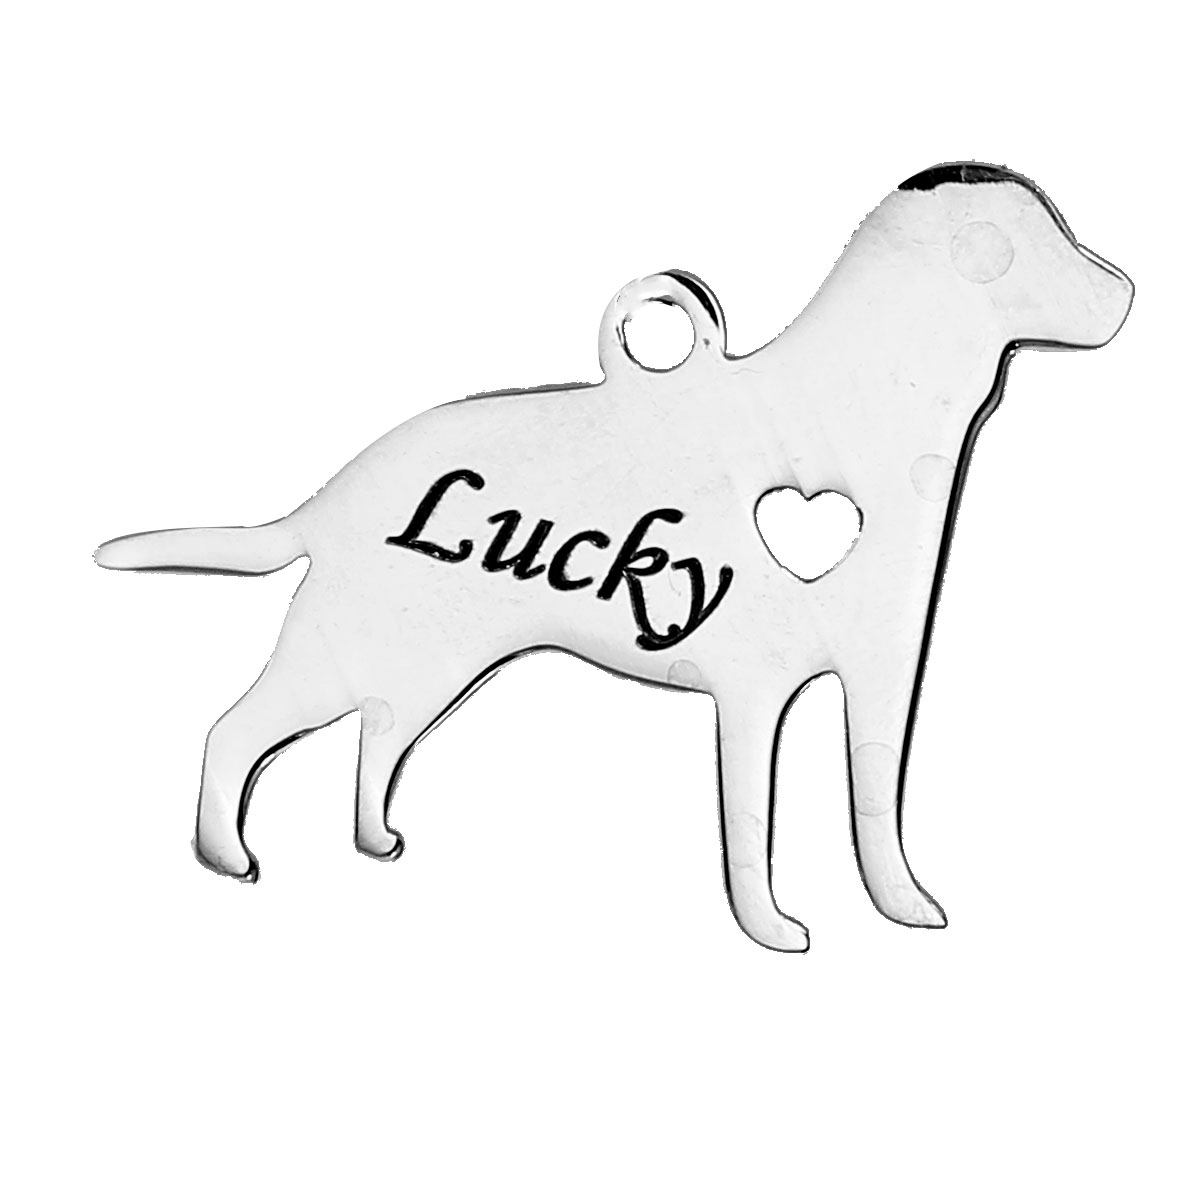 Picture of 1 Piece 304 Stainless Steel Pet Silhouette Blank Stamping Tags Charms Labrador Retriever Dog Heart Silver Tone Double-sided Polishing 29mm x 24mm